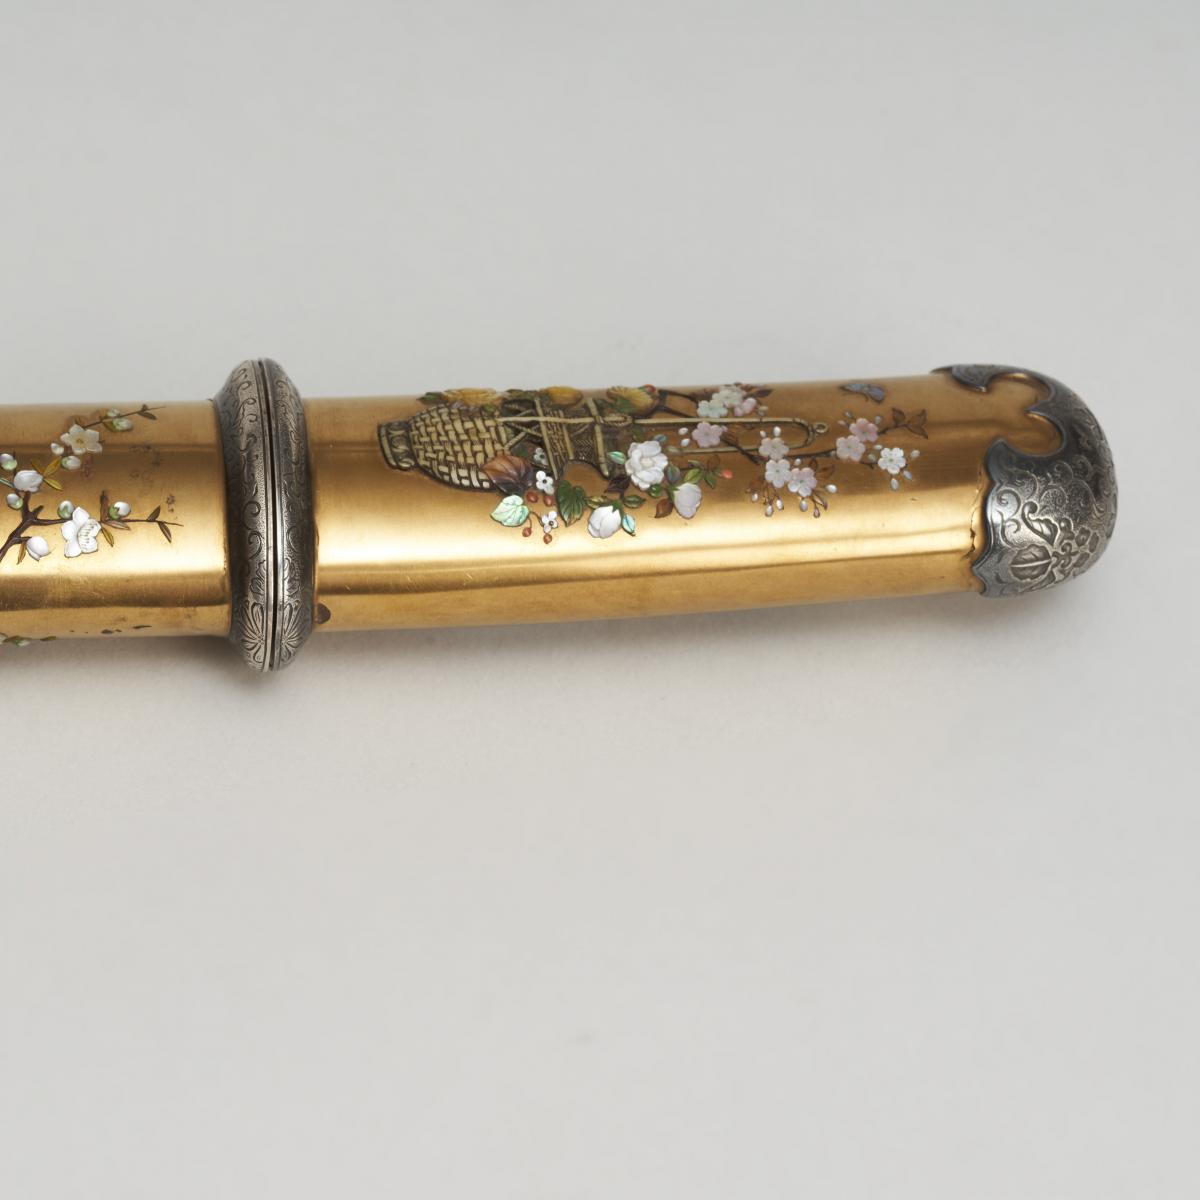 A Japanese Tanto with a gold lacquer sheath and handle inlaid with Shibiyama style decoration.